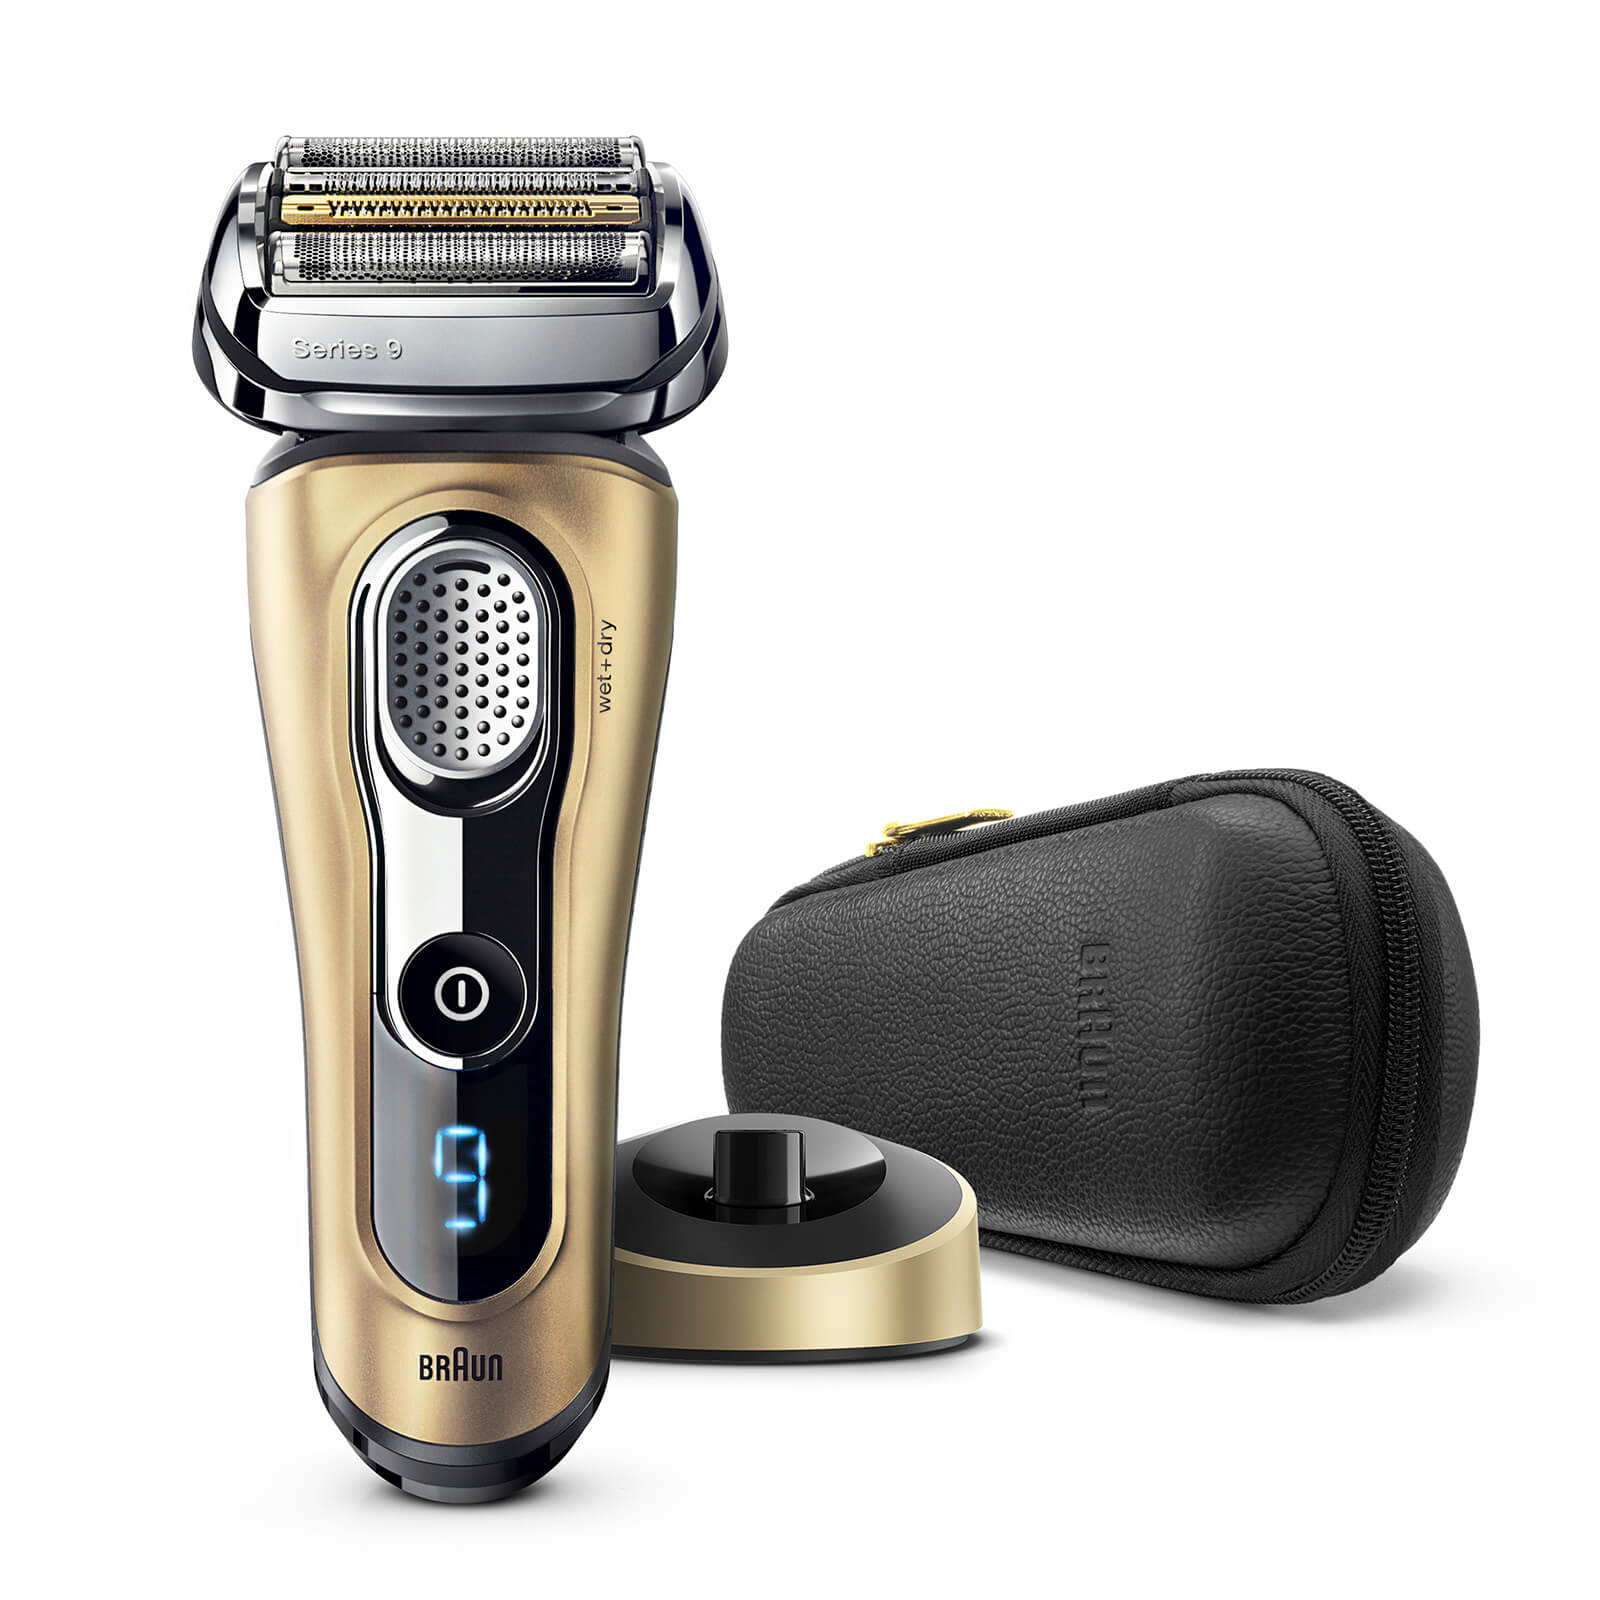 Braun Series 9 Electric Shaver - Gifting Edition